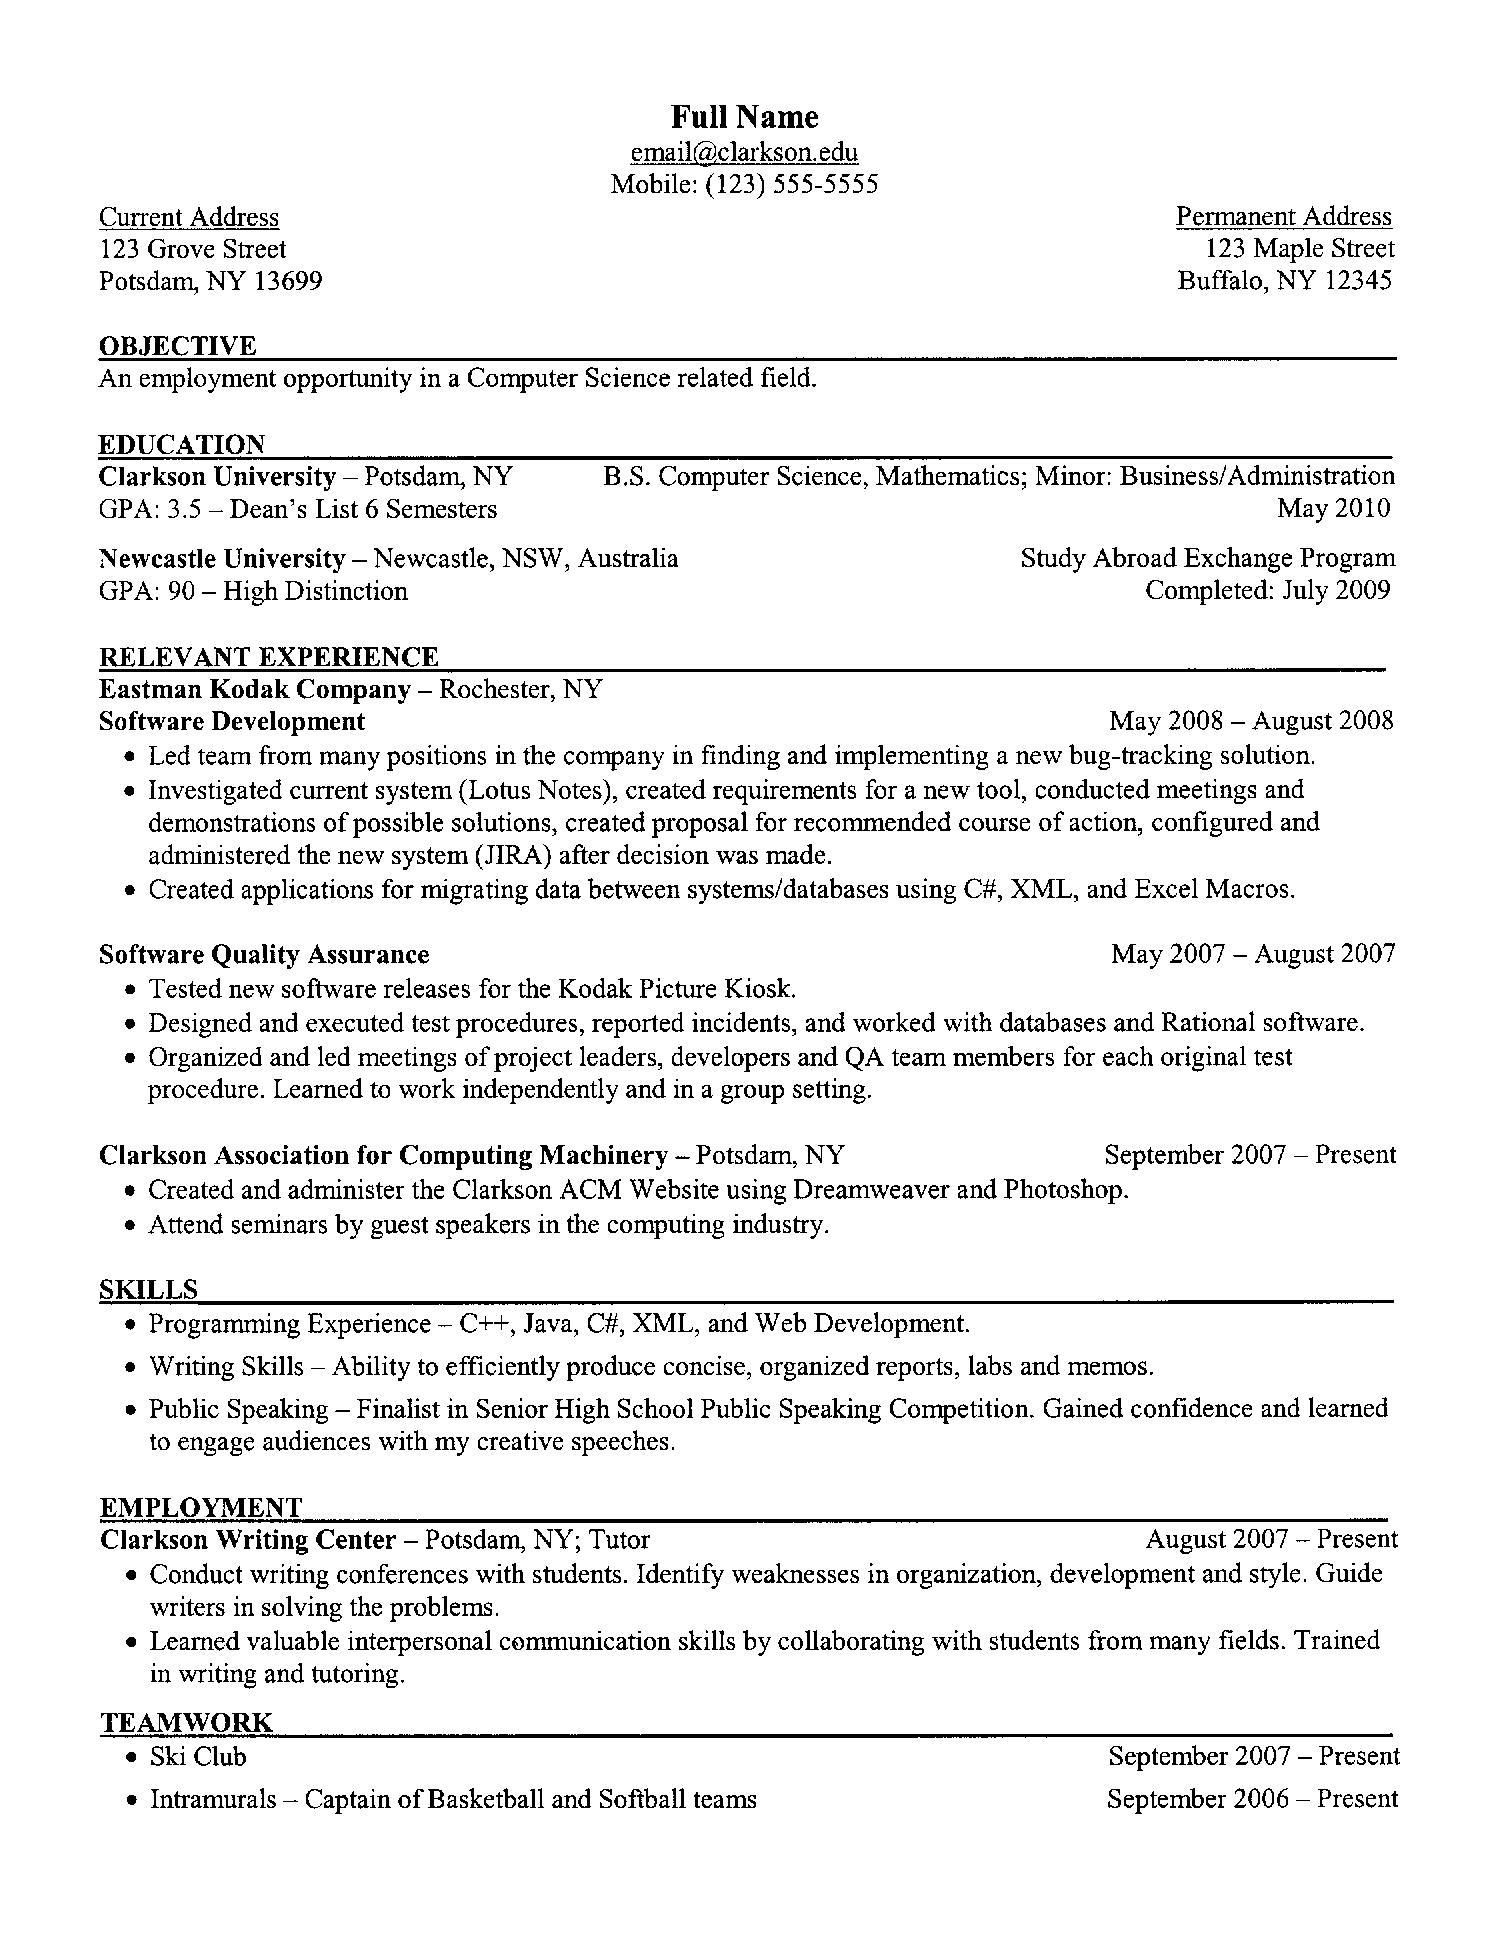 Resume Example 2 Resume Skills Student Resume Student in dimensions 1488 X 1952